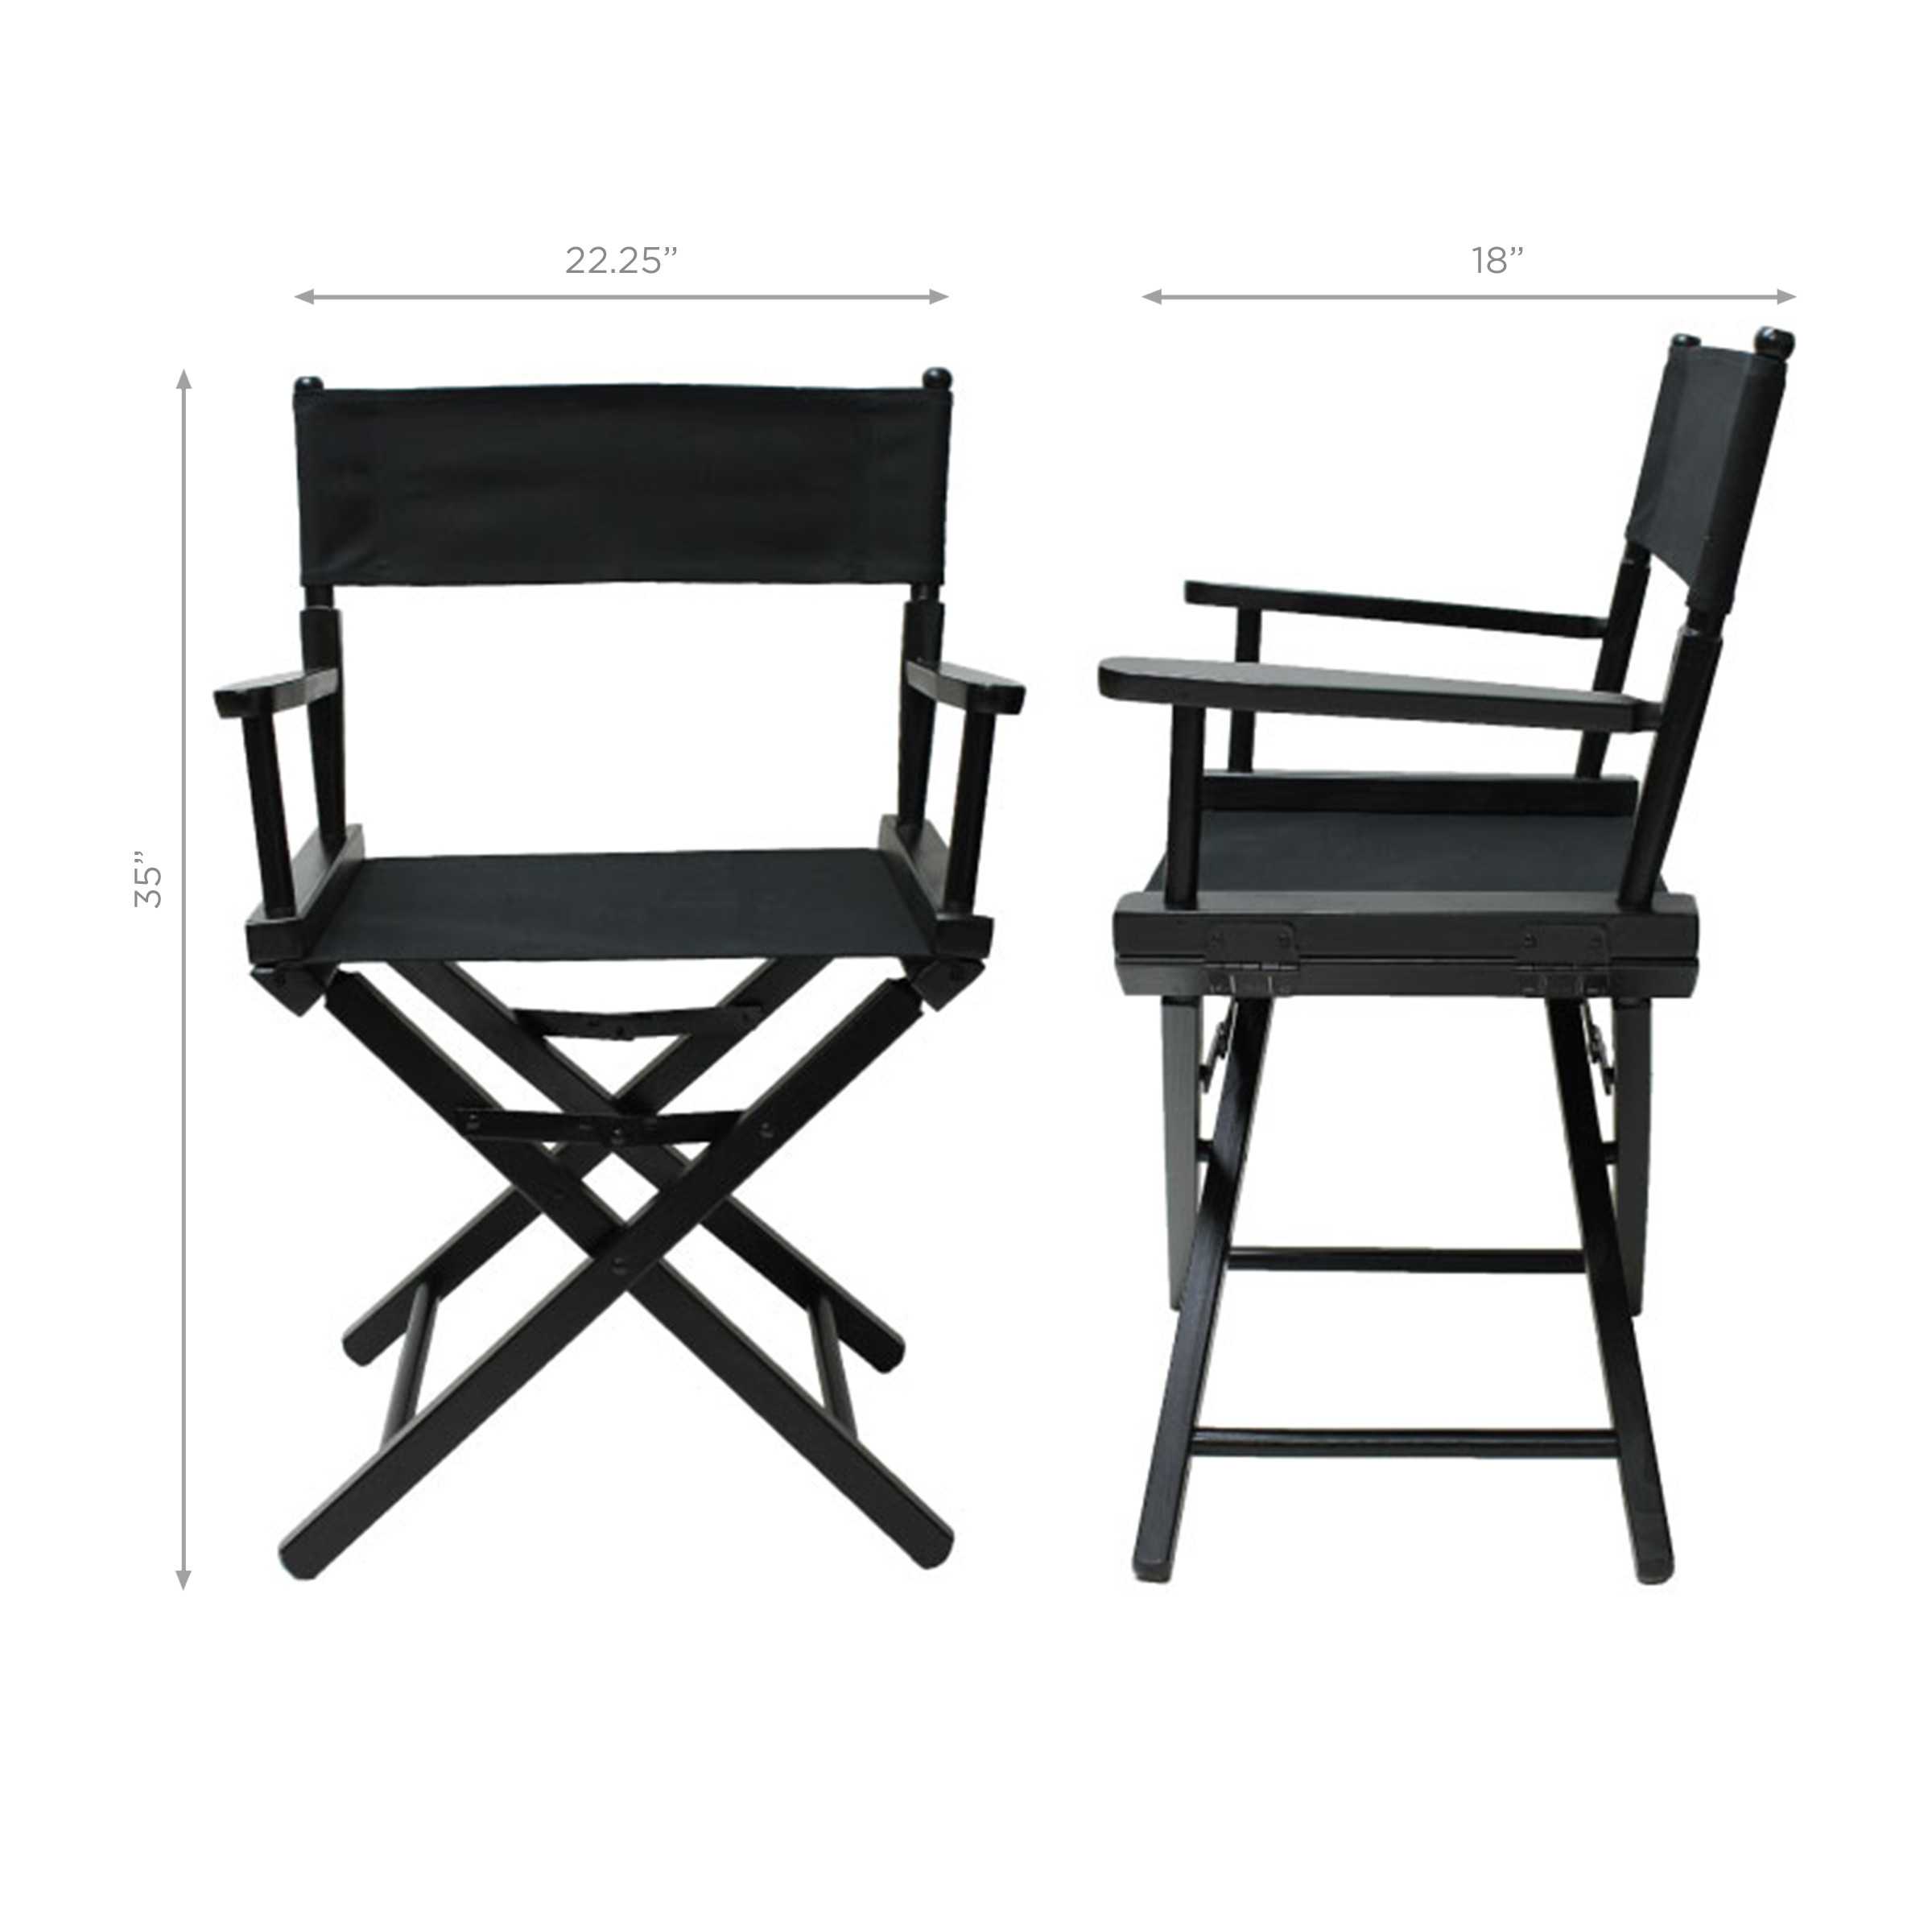 OHIO STATE DIRECTORS CHAIR-TABLE HEIGHT